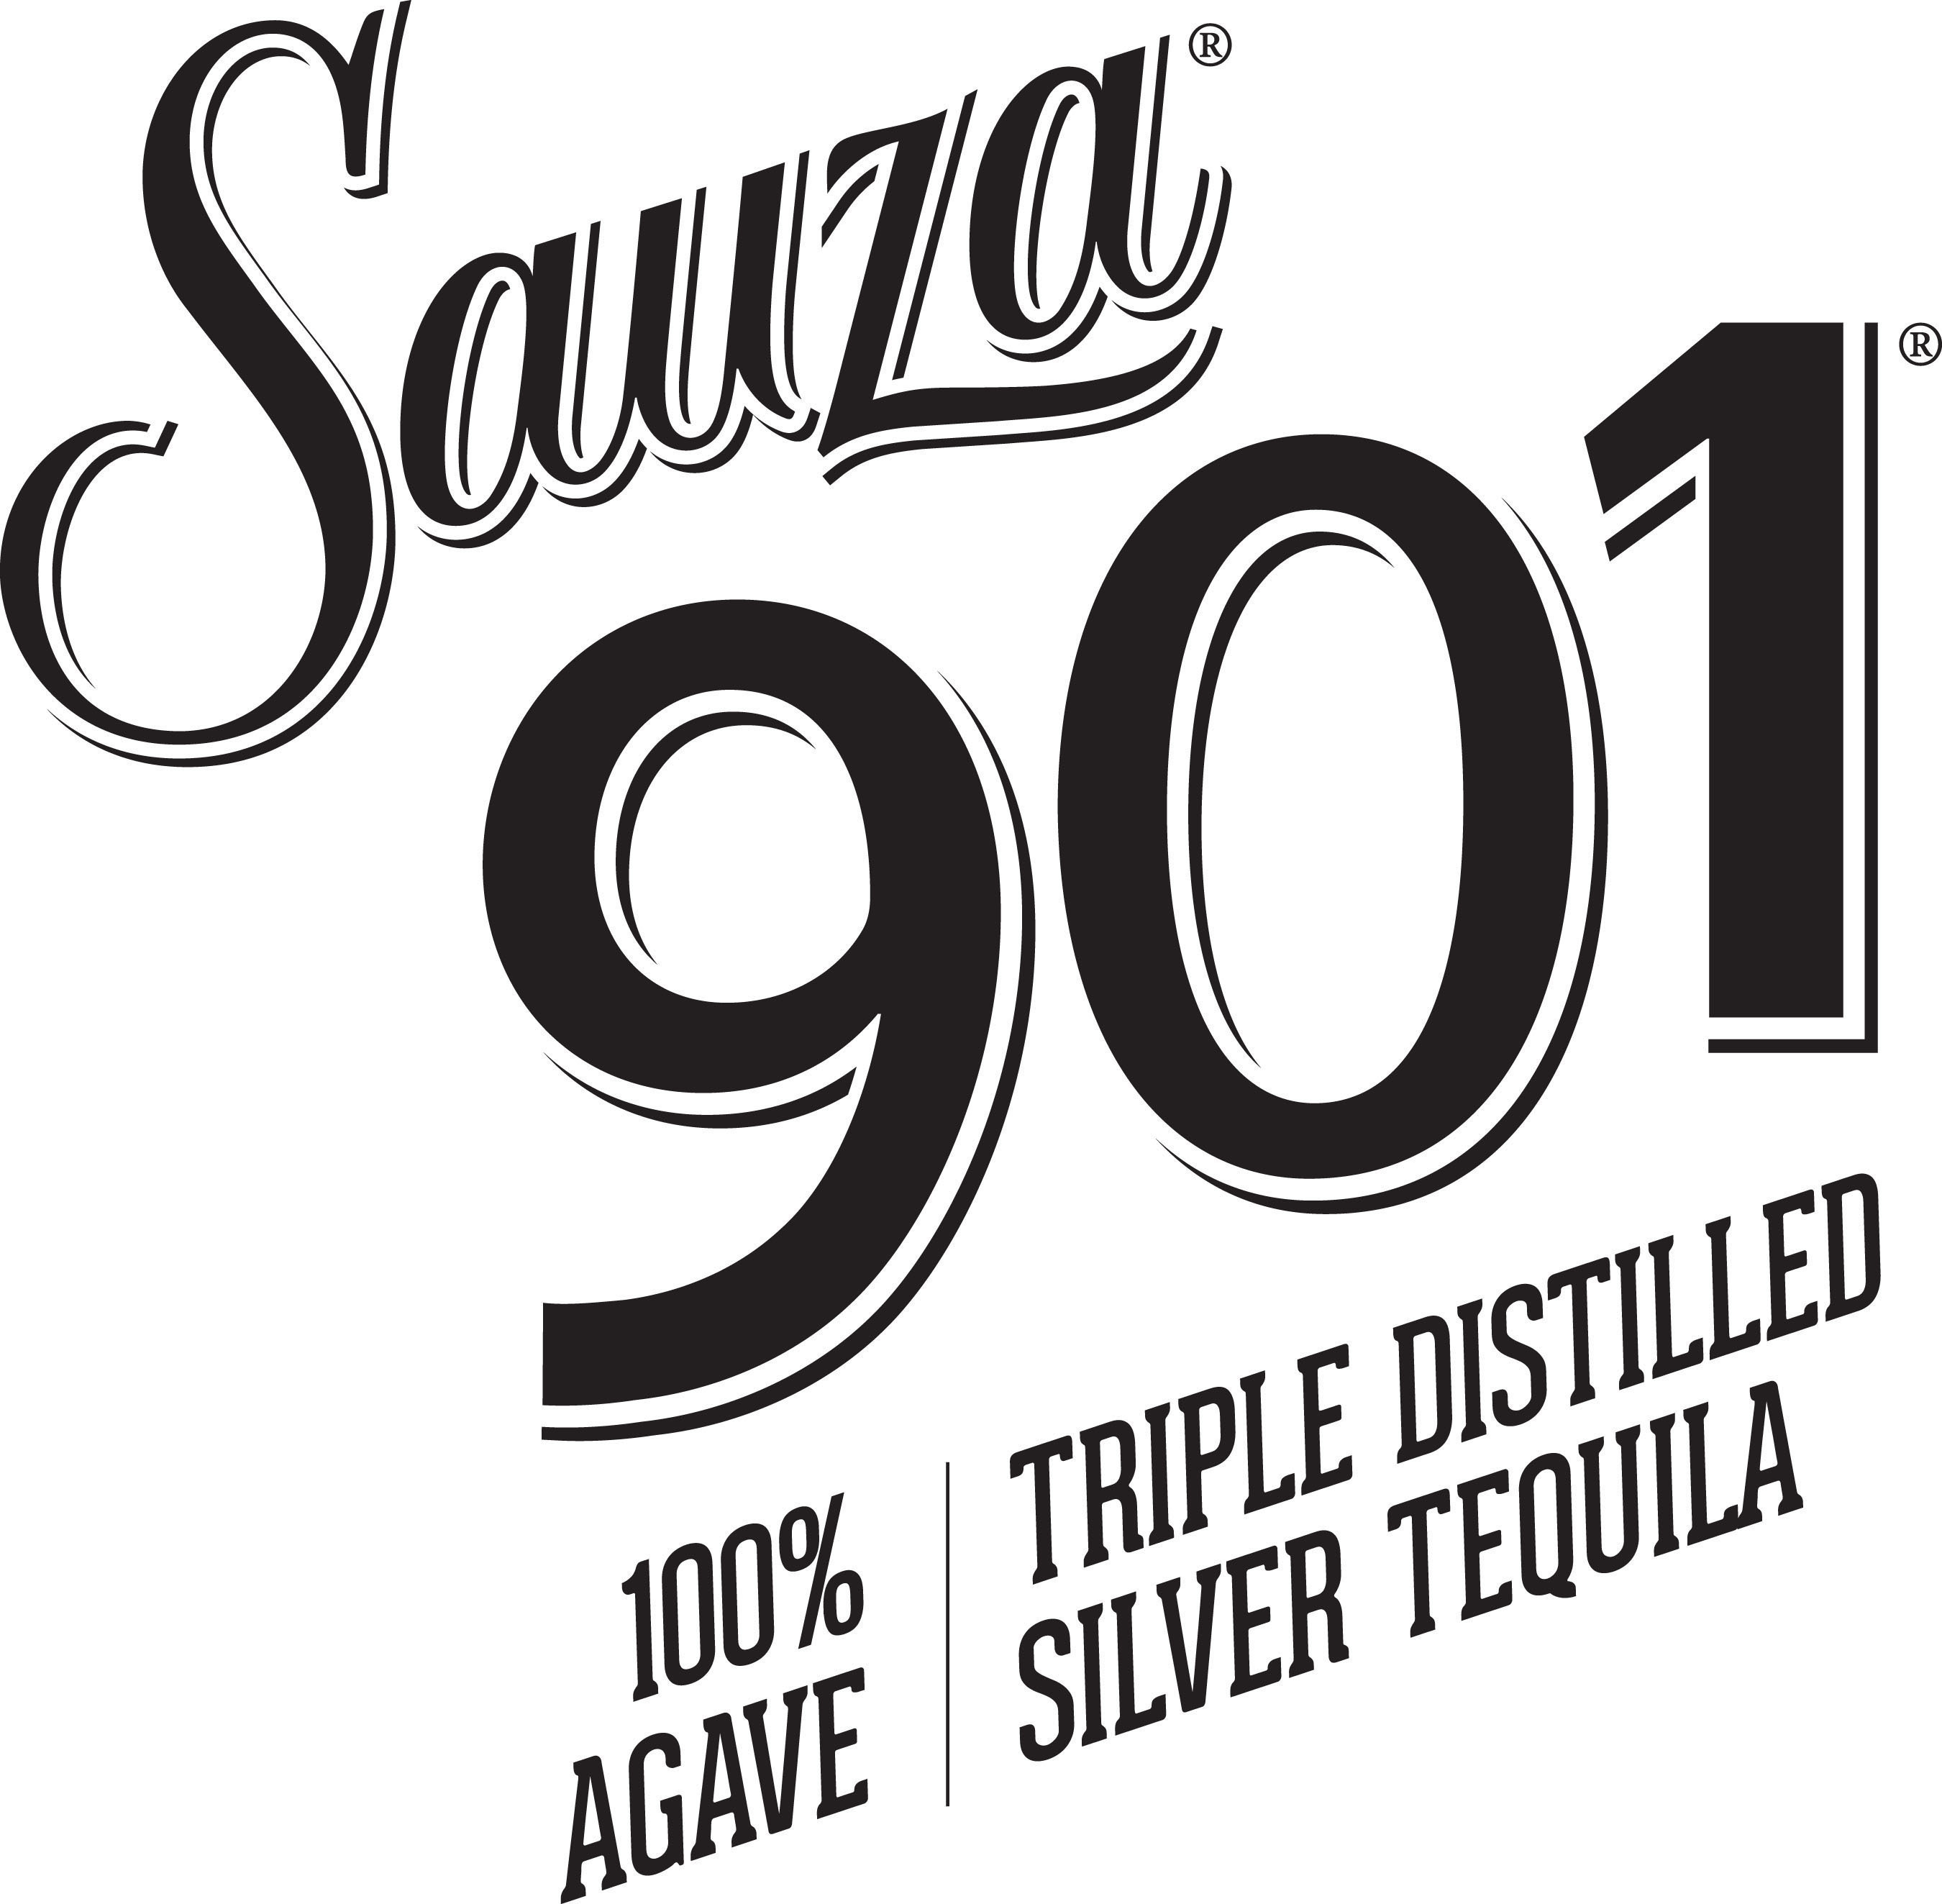 Sauza(R) Tequila and Justin Timberlake Join Forces To Shake Up The Super-Premium Tequila Category With Sauza(R) 901(R). (PRNewsFoto/Beam Inc.) (PRNewsFoto/BEAM INC.)